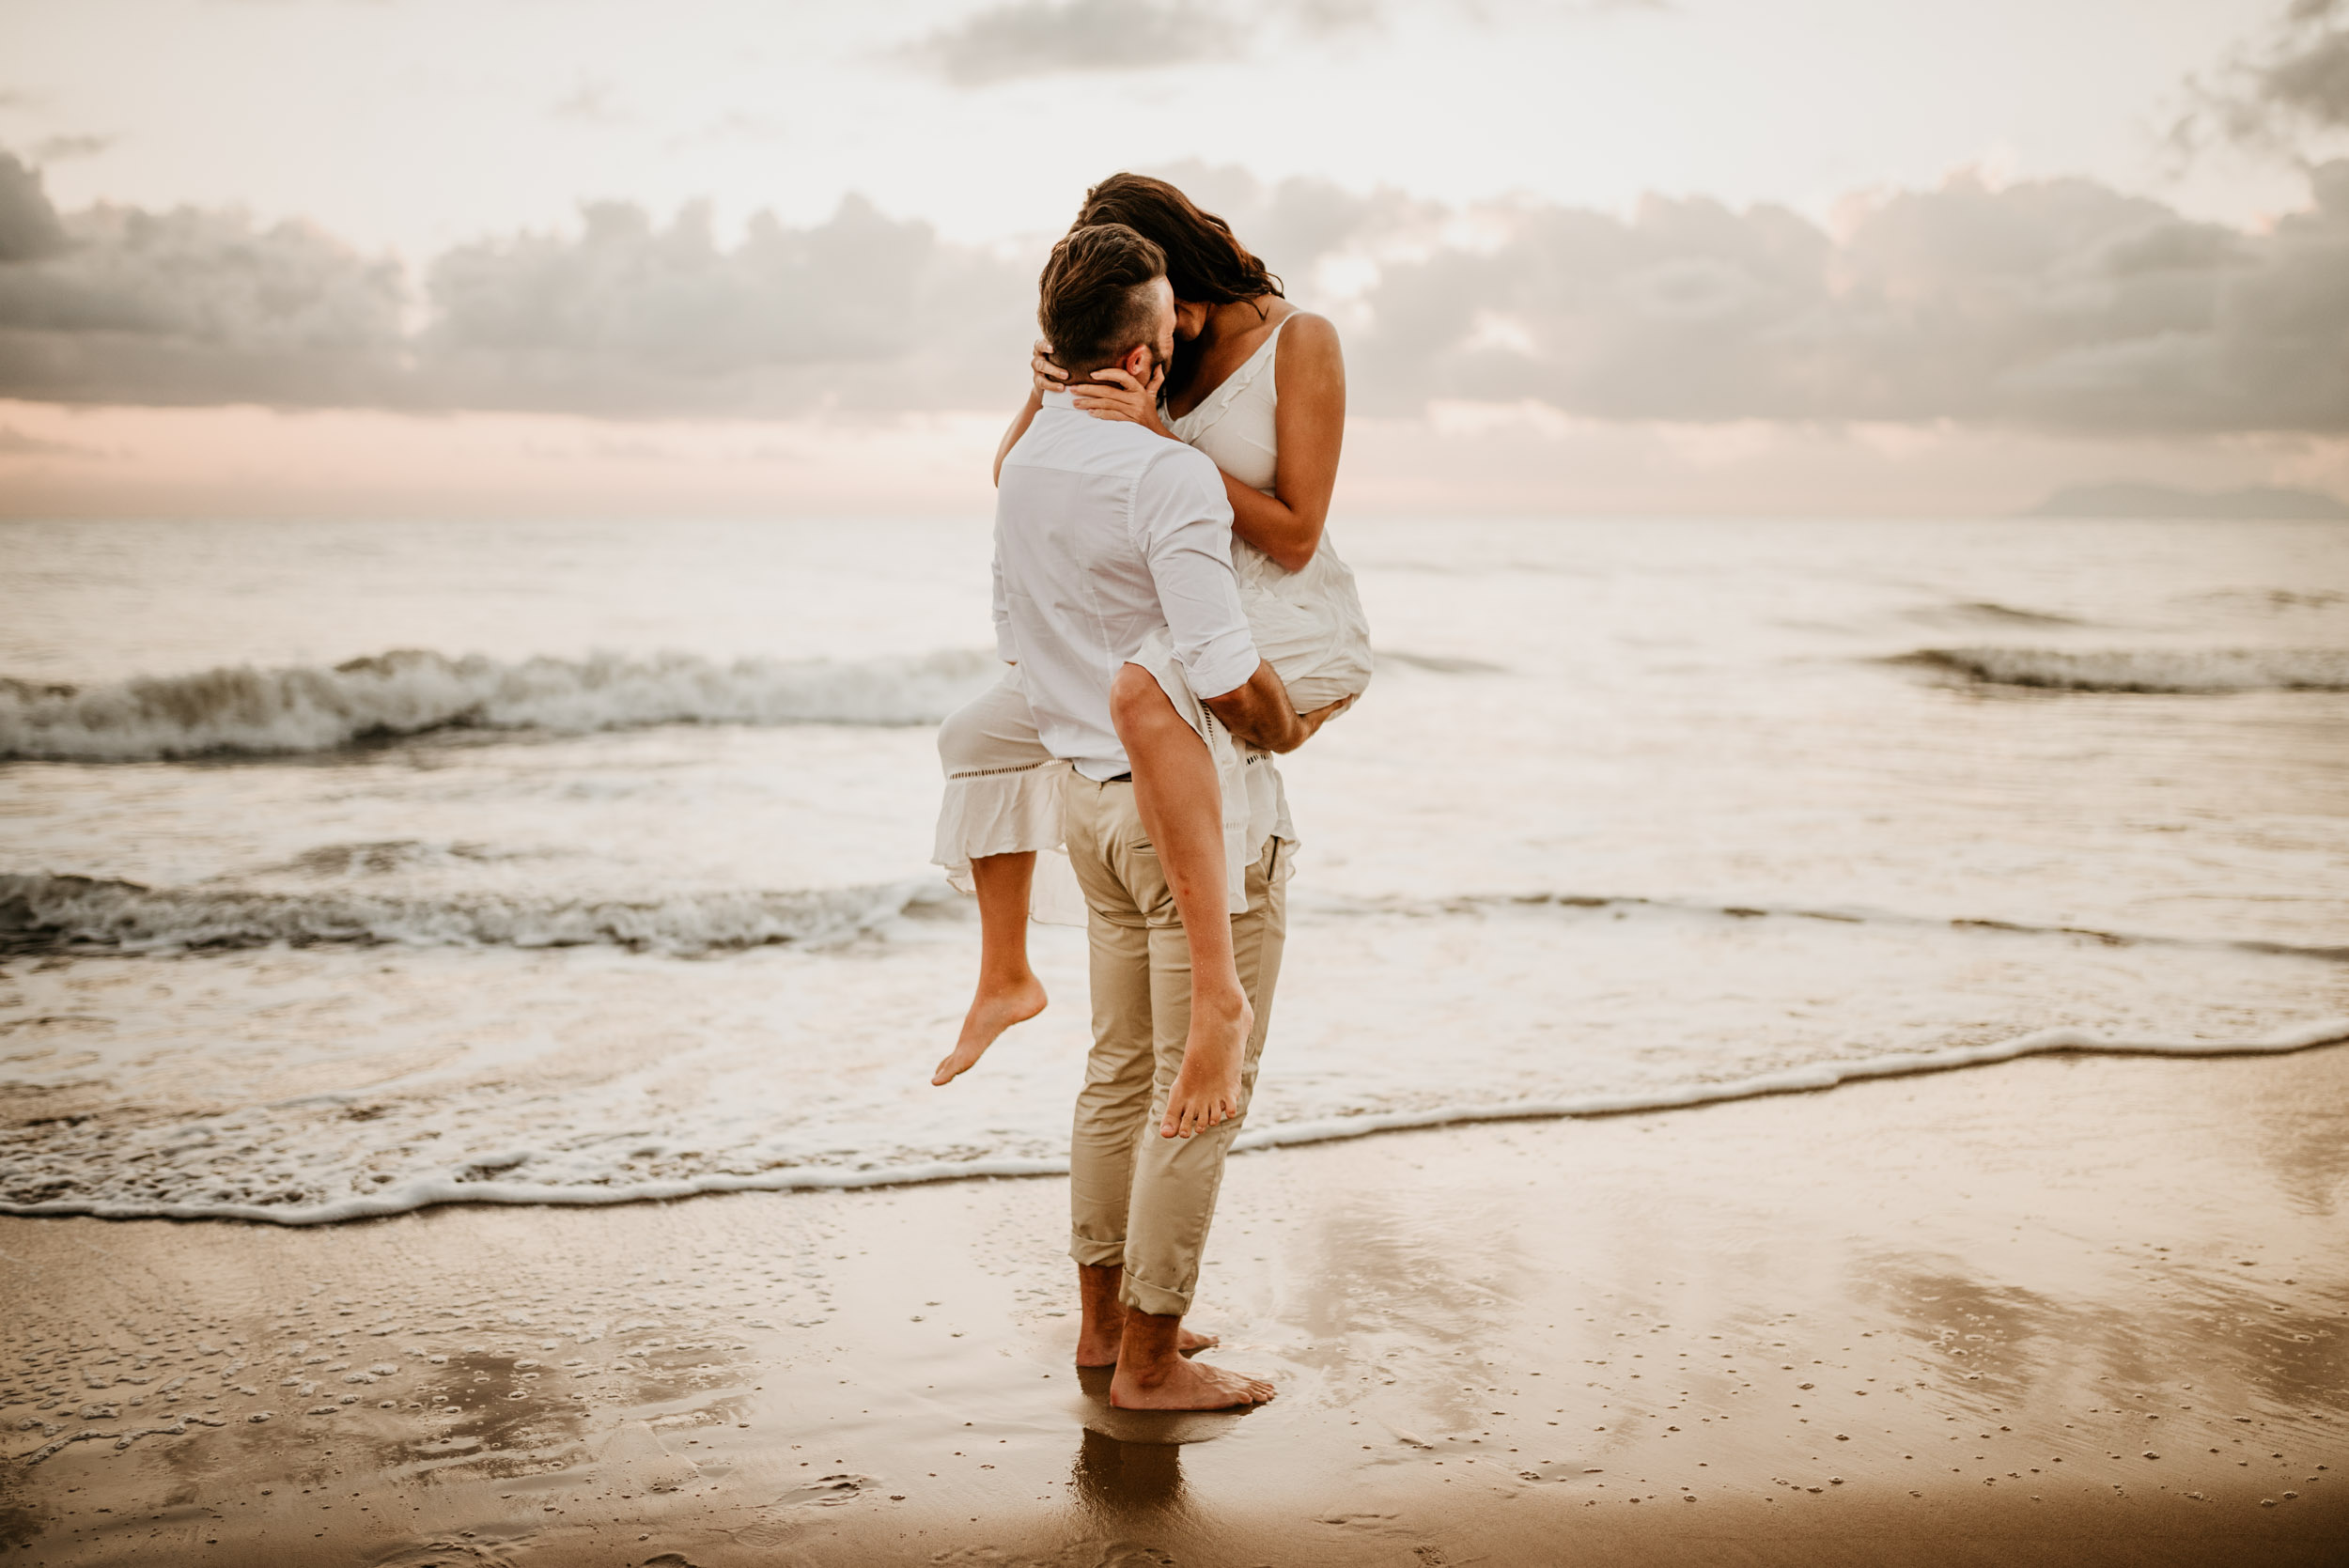 The Raw Photographer - Cairns Wedding Photographer - Engaged Engagement - Beach location - Candid Photography Queensland-6.jpg